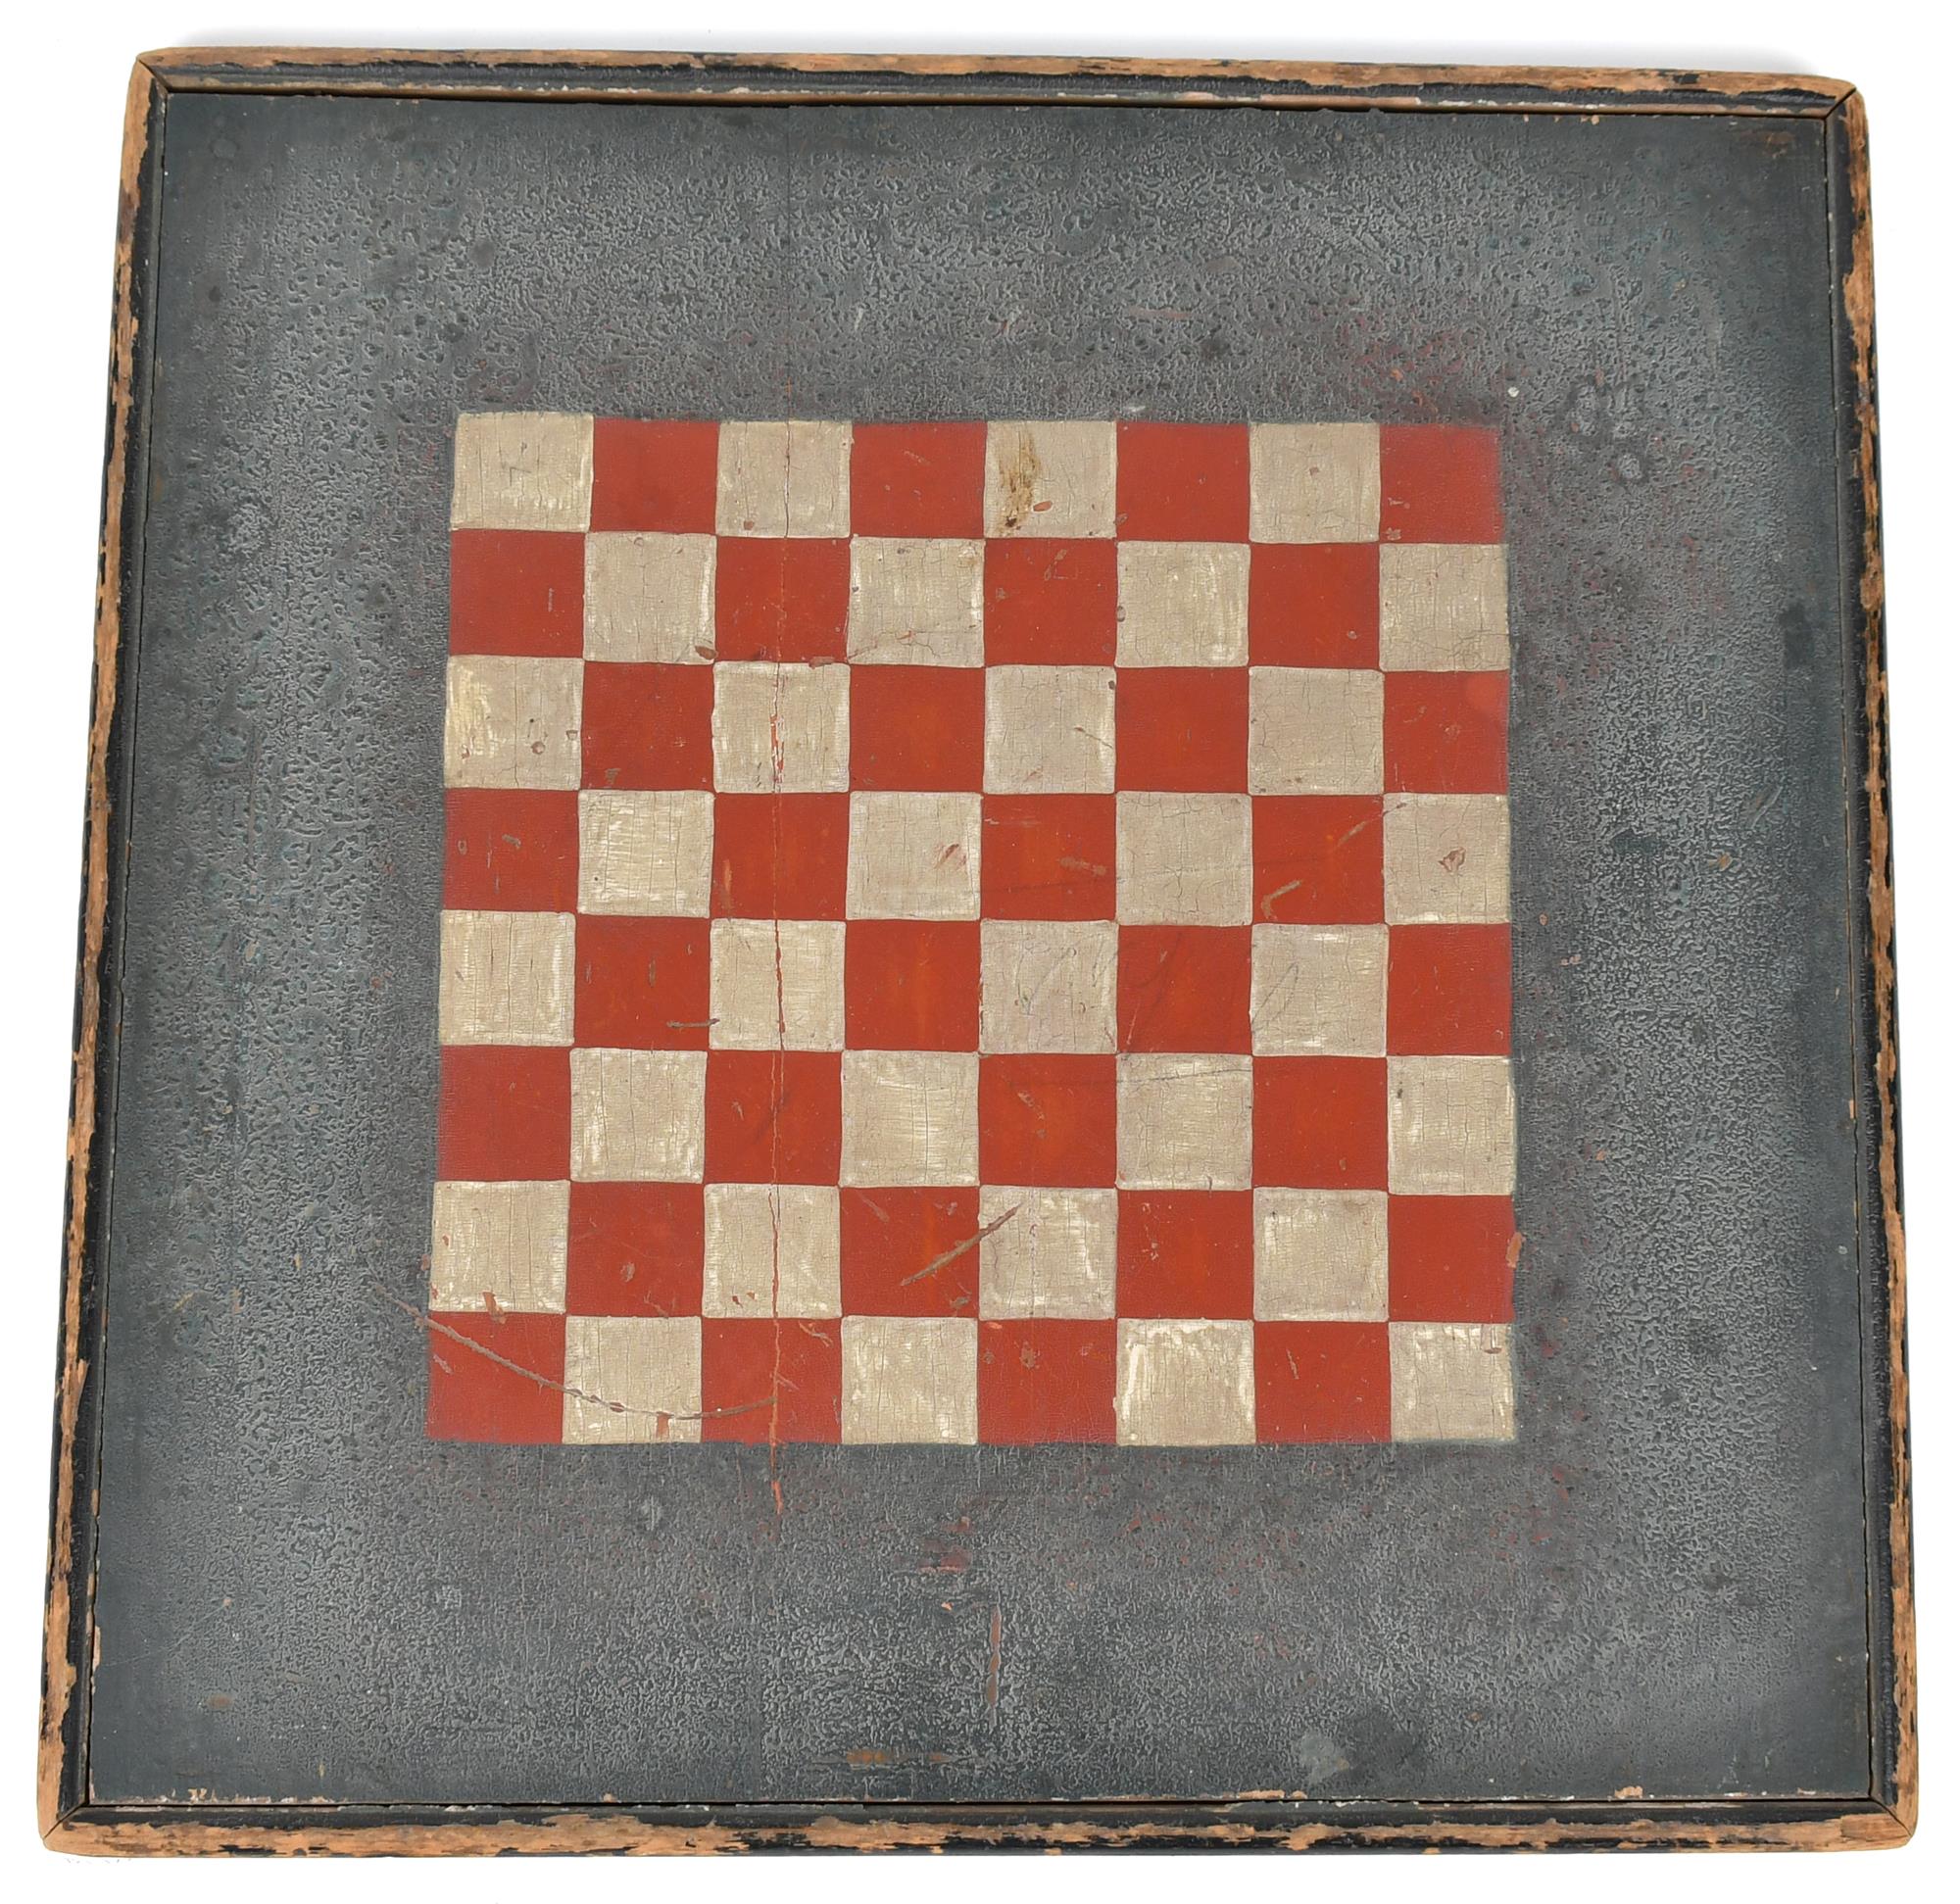 NICE 19TH C PAINTED GAME BOARD  3acbd5